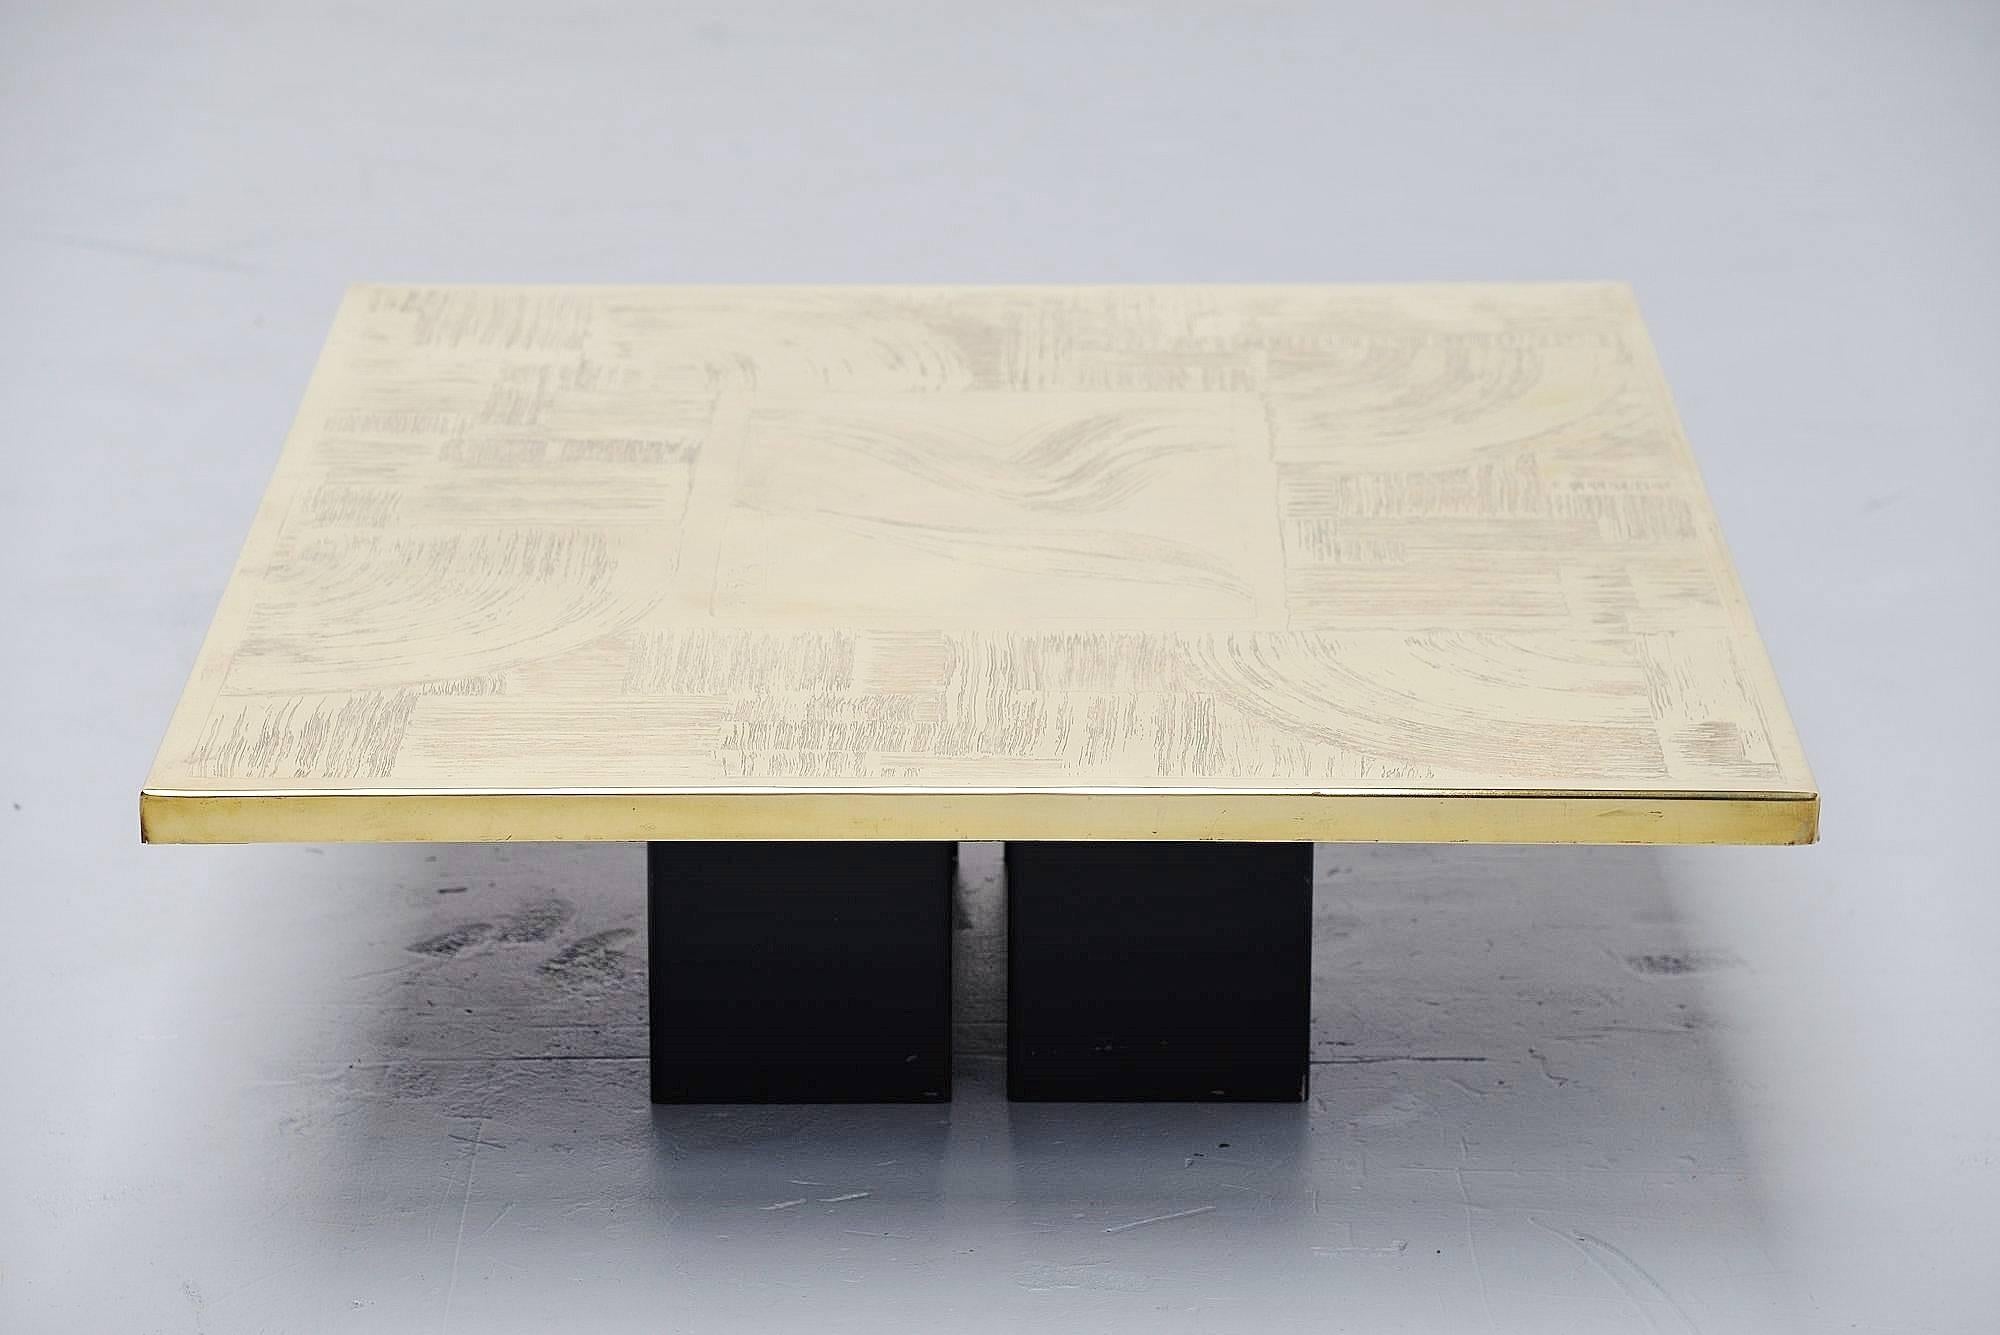 Unique one off coffee table designed and made by Christian Heckscher, Belgium, 1972. From only a short period between 1971 and 1974 he made about 20 tables in Antwerp, Belgium, after that he moved to the USA. All unique pieces in different designs,